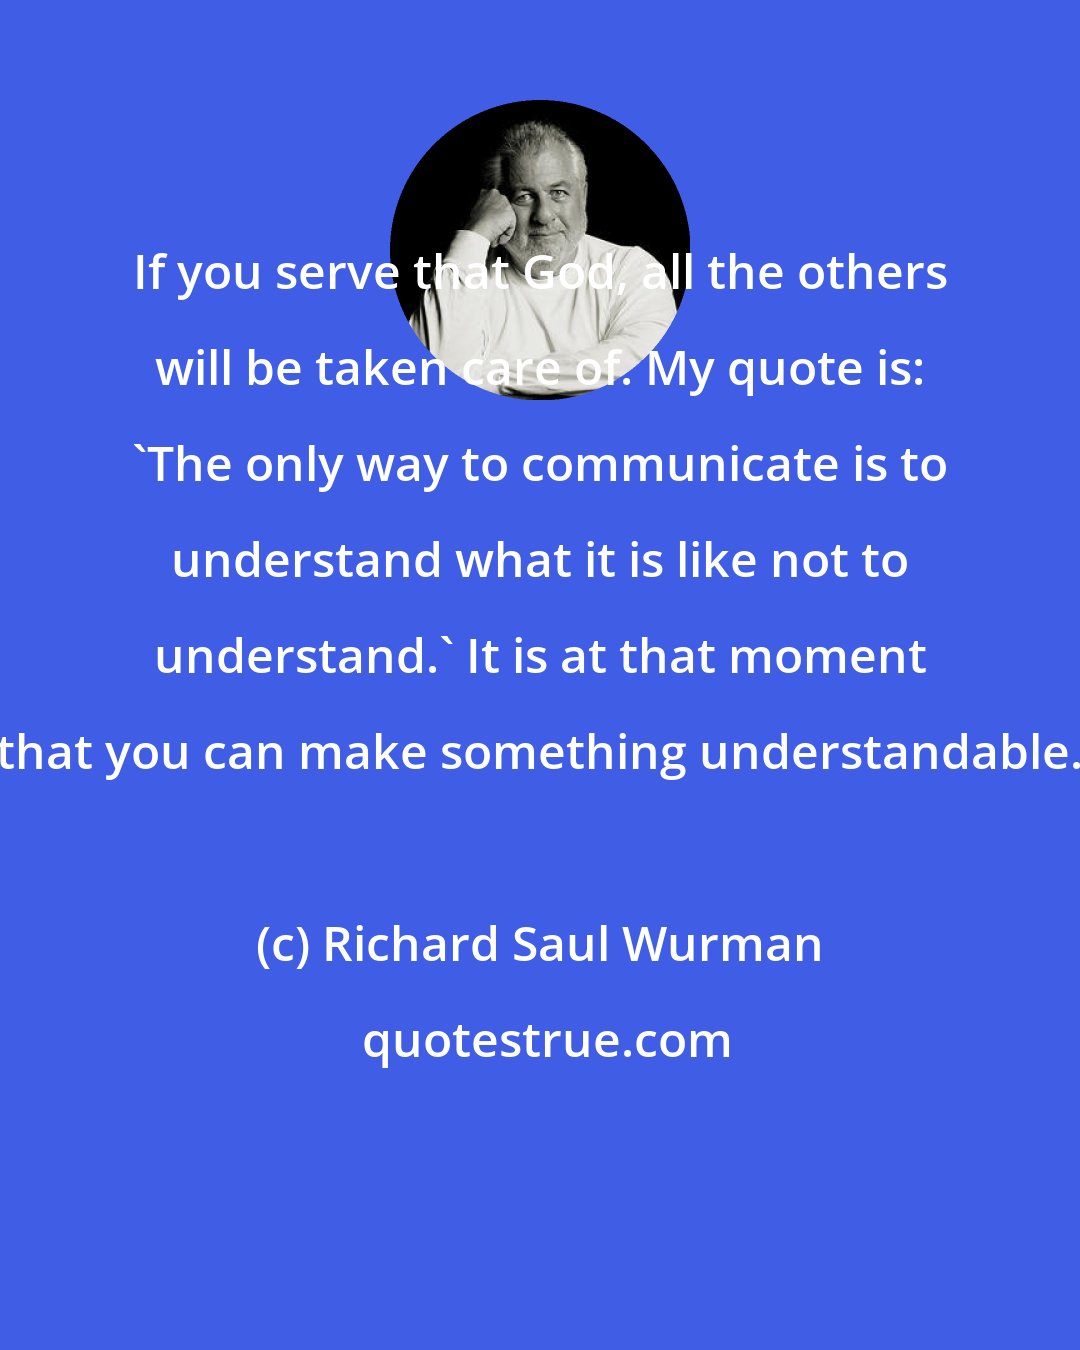 Richard Saul Wurman: If you serve that God, all the others will be taken care of. My quote is: 'The only way to communicate is to understand what it is like not to understand.' It is at that moment that you can make something understandable.